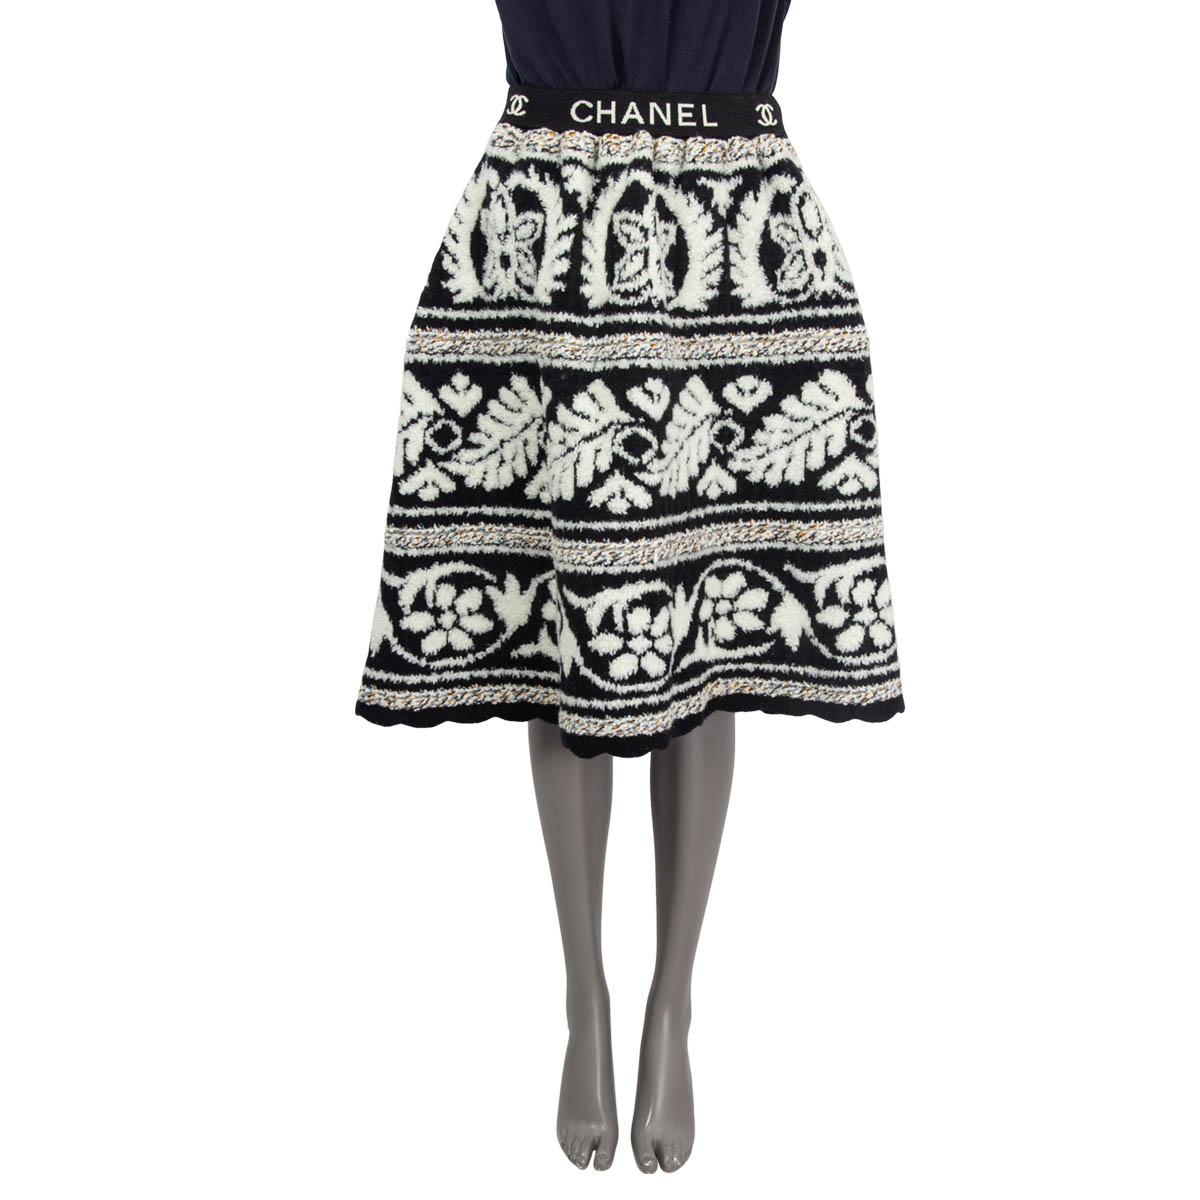 100% authentic Chanel flared chunky knit below-length skirt in black, off-white, orange and blue wool (91%), polyamide (8%) and cashmere (1%). Opens with a concealed zipper and a hook on the side. Unlined. Has been worn and is in excellent